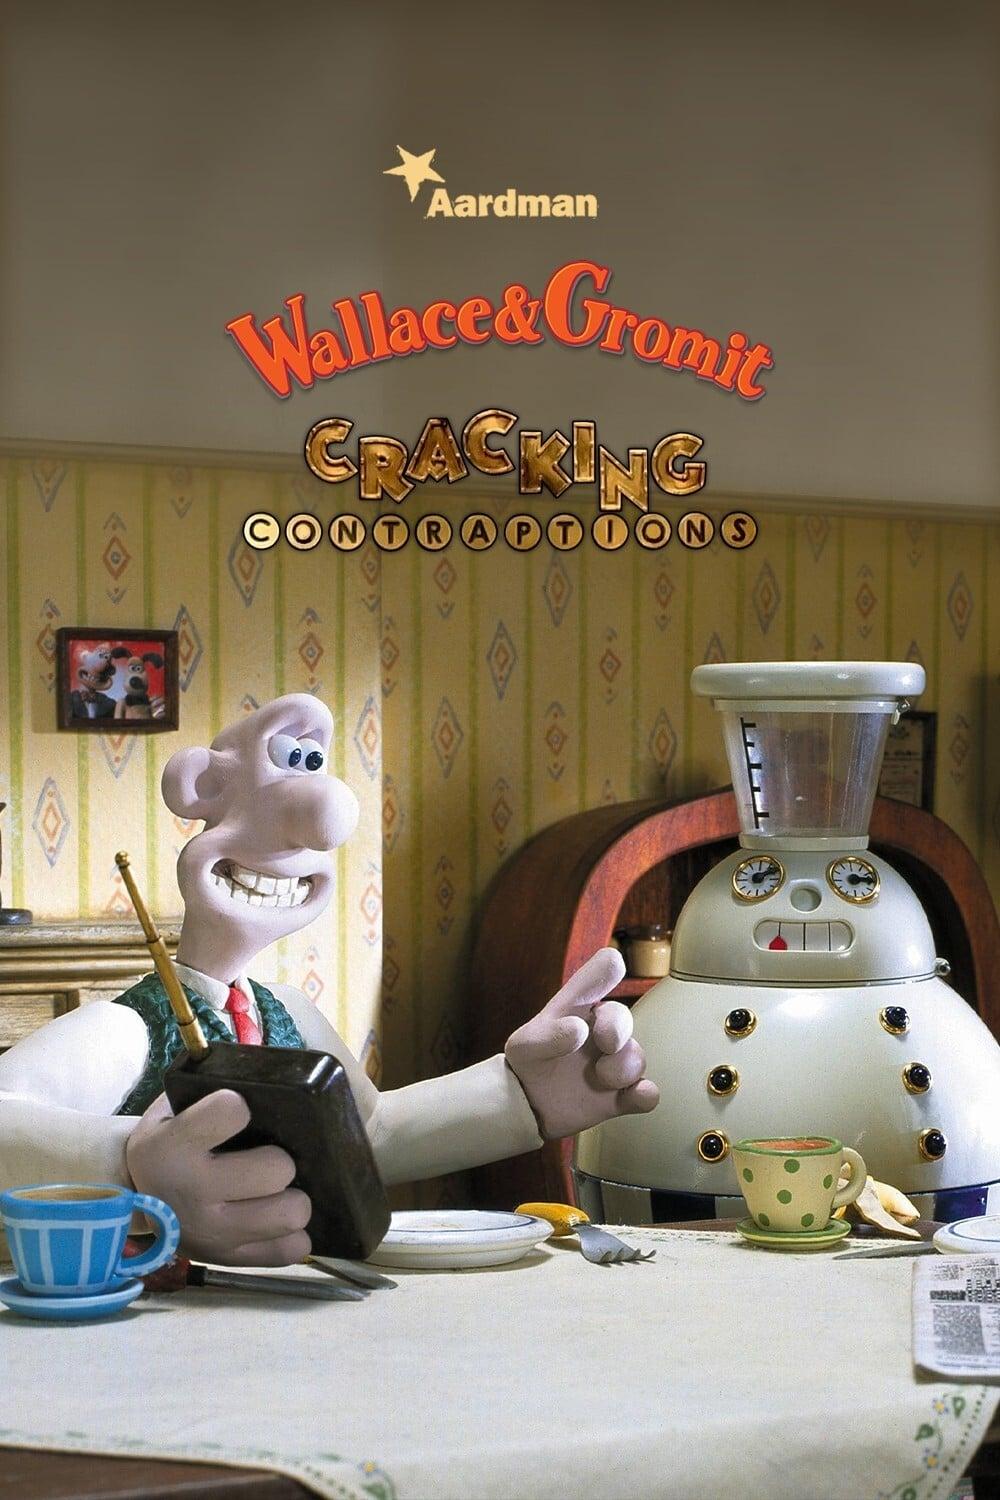 Wallace & Gromit's Cracking Contraptions poster